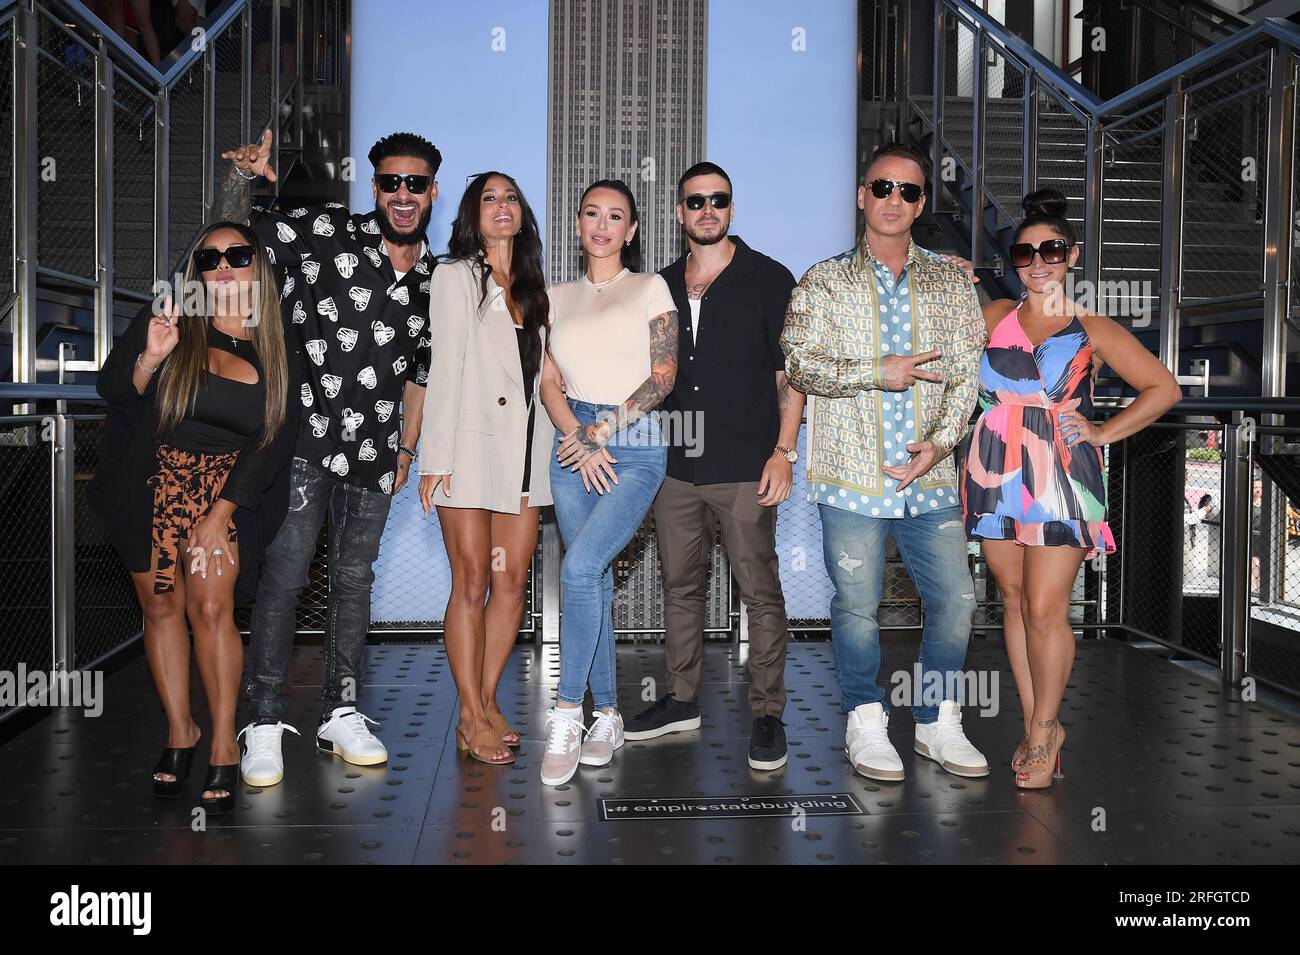 New York, USA. 03rd Aug, 2023. ‘Jersey Shore Family Vacation' cast members (l-r) Nicole ‘Snooki' Polizzi, Paul 'DJ Pauly D' DelVecchio, Sammi 'Sweetheart' Giancola, Jenni 'JWOWW' Farley, Vinny Guadagnino, Mike ‘The Situation' Sorrentino, and Deena Nicole Cortese visit the Empire State Building, New York, NY, August 3, 2023. (Photo by Anthony Behar/Sipa USA) Credit: Sipa USA/Alamy Live News Stock Photo